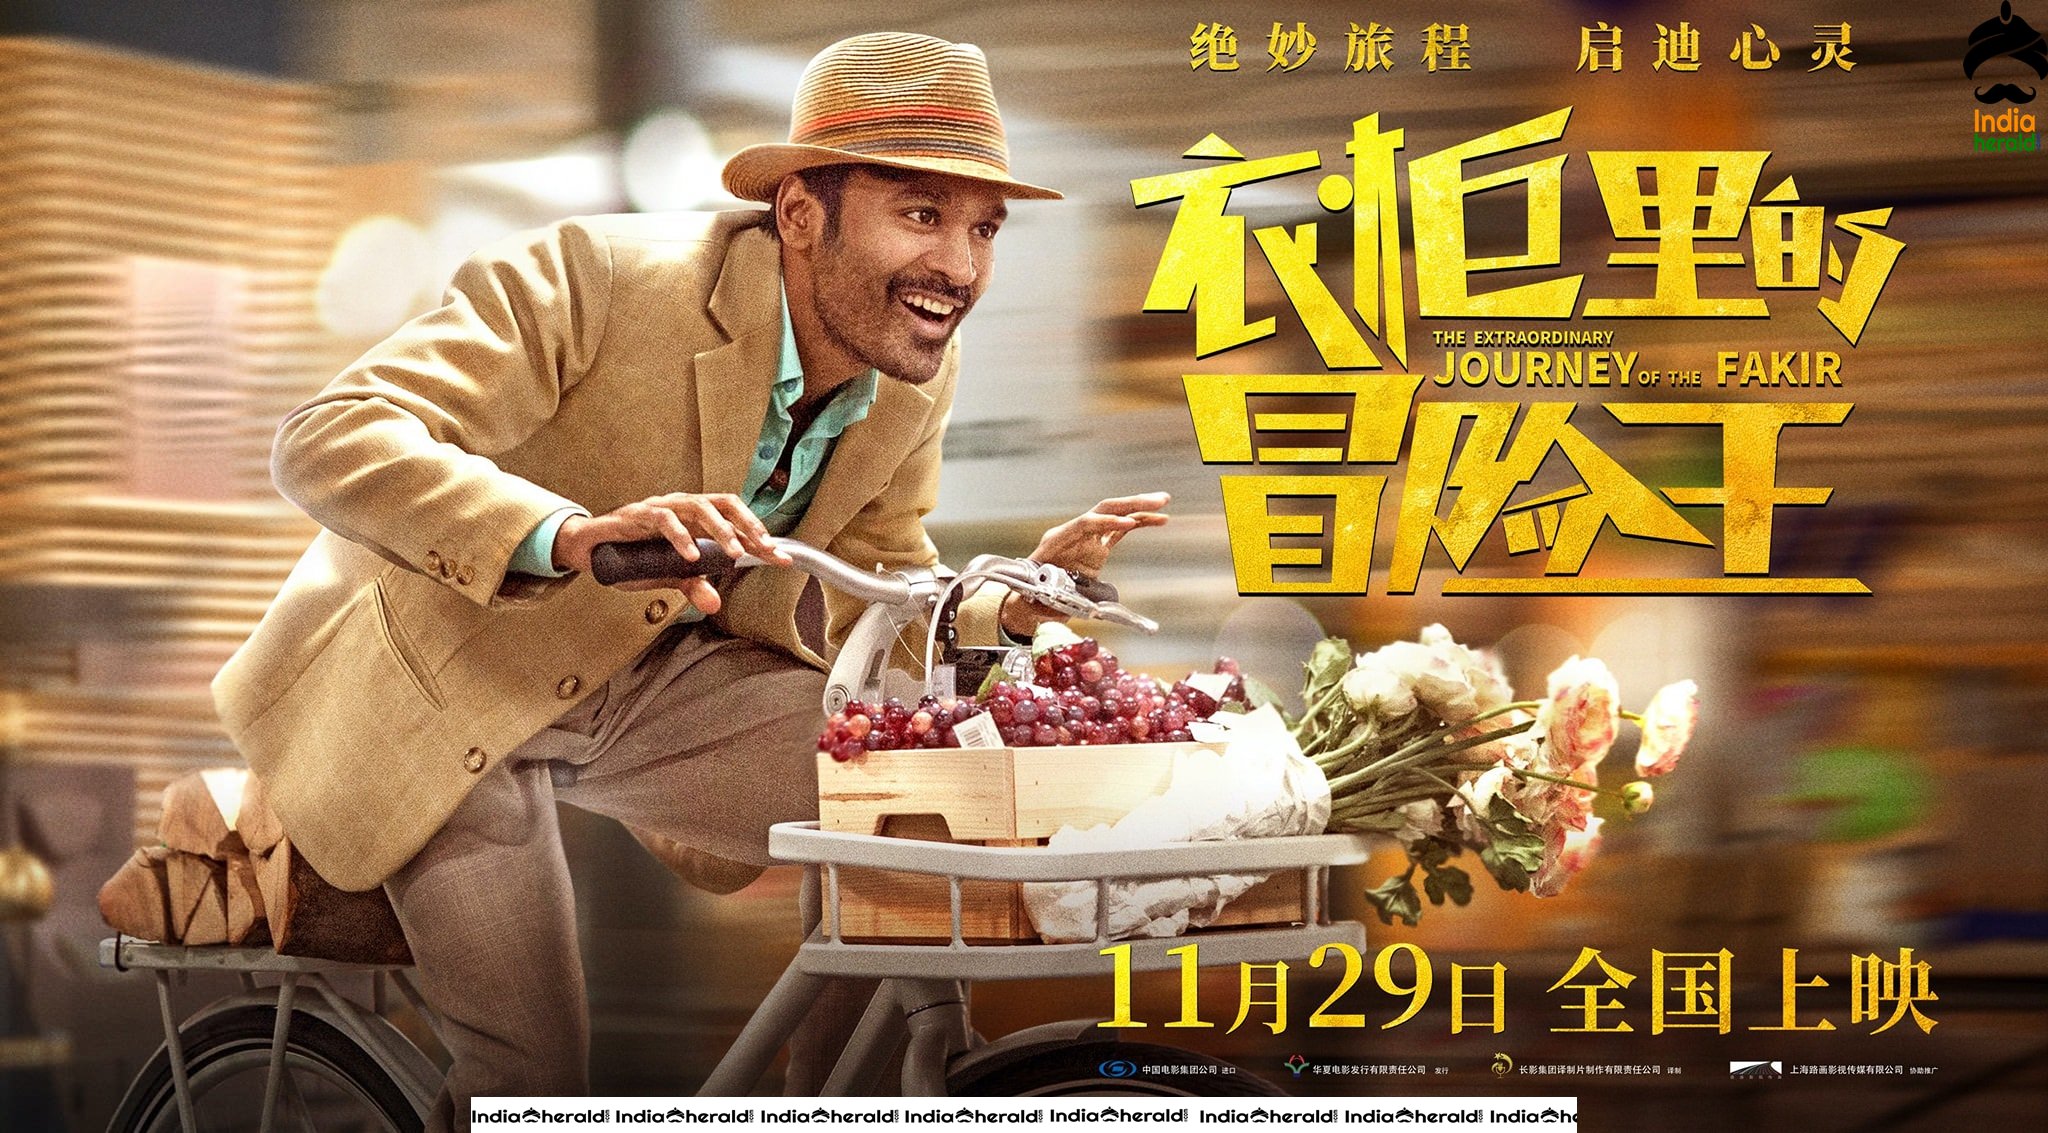 Dhanush in The Extra Ordinary Journey of Fakir Chinese Posters